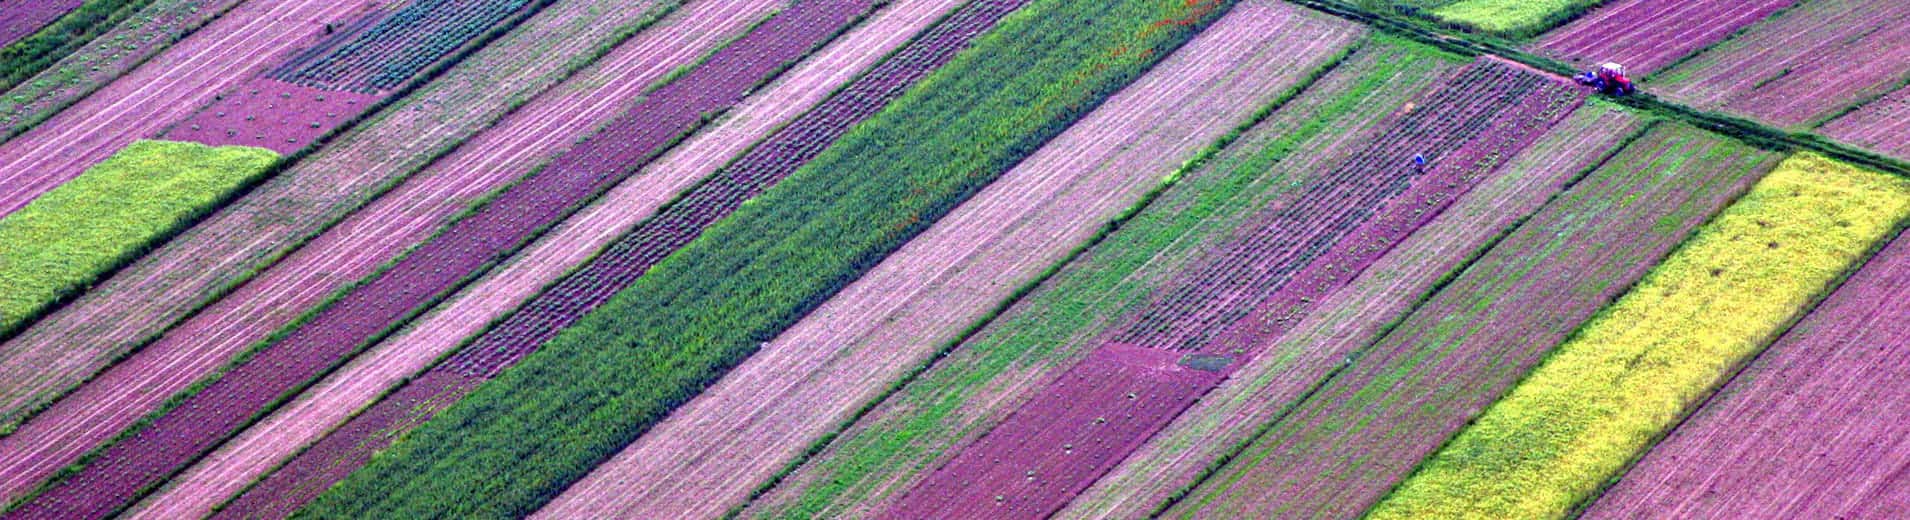 Colorful_fields_N_2368